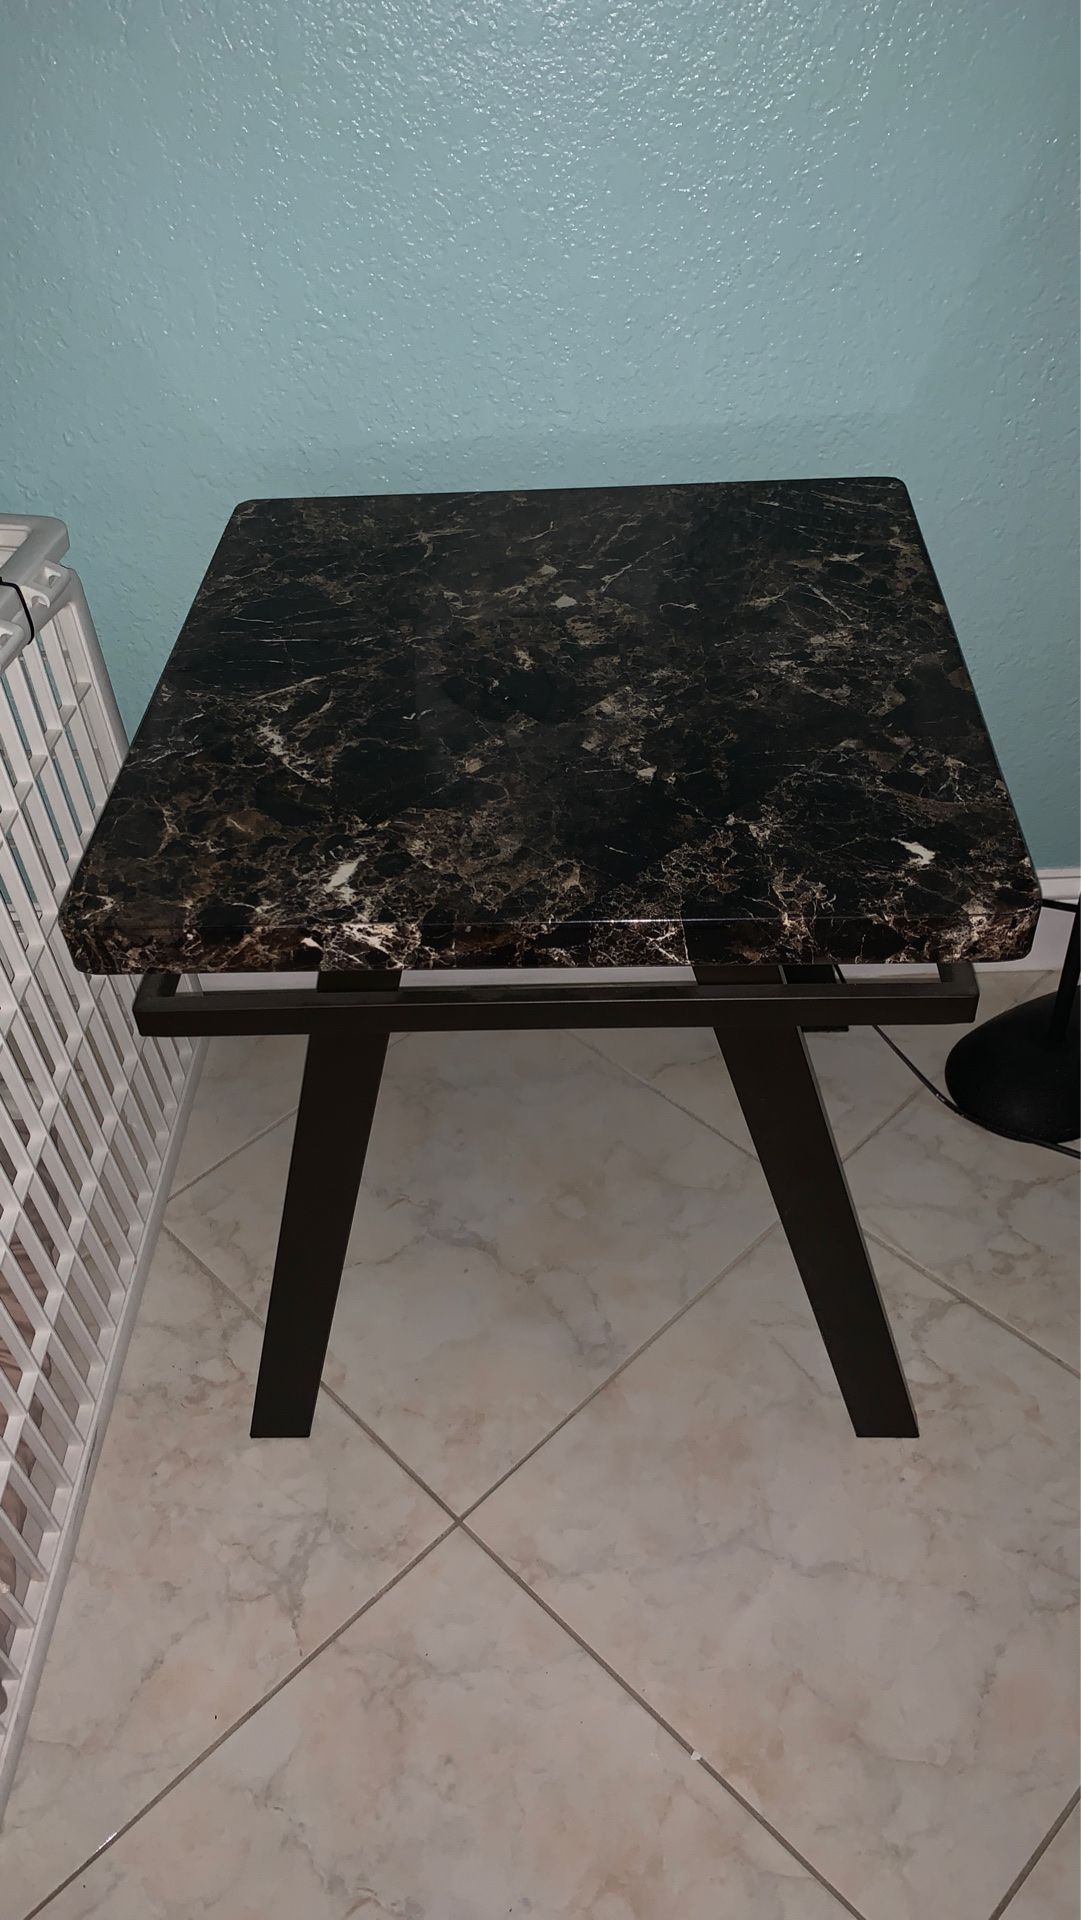 22” x 22” formica table